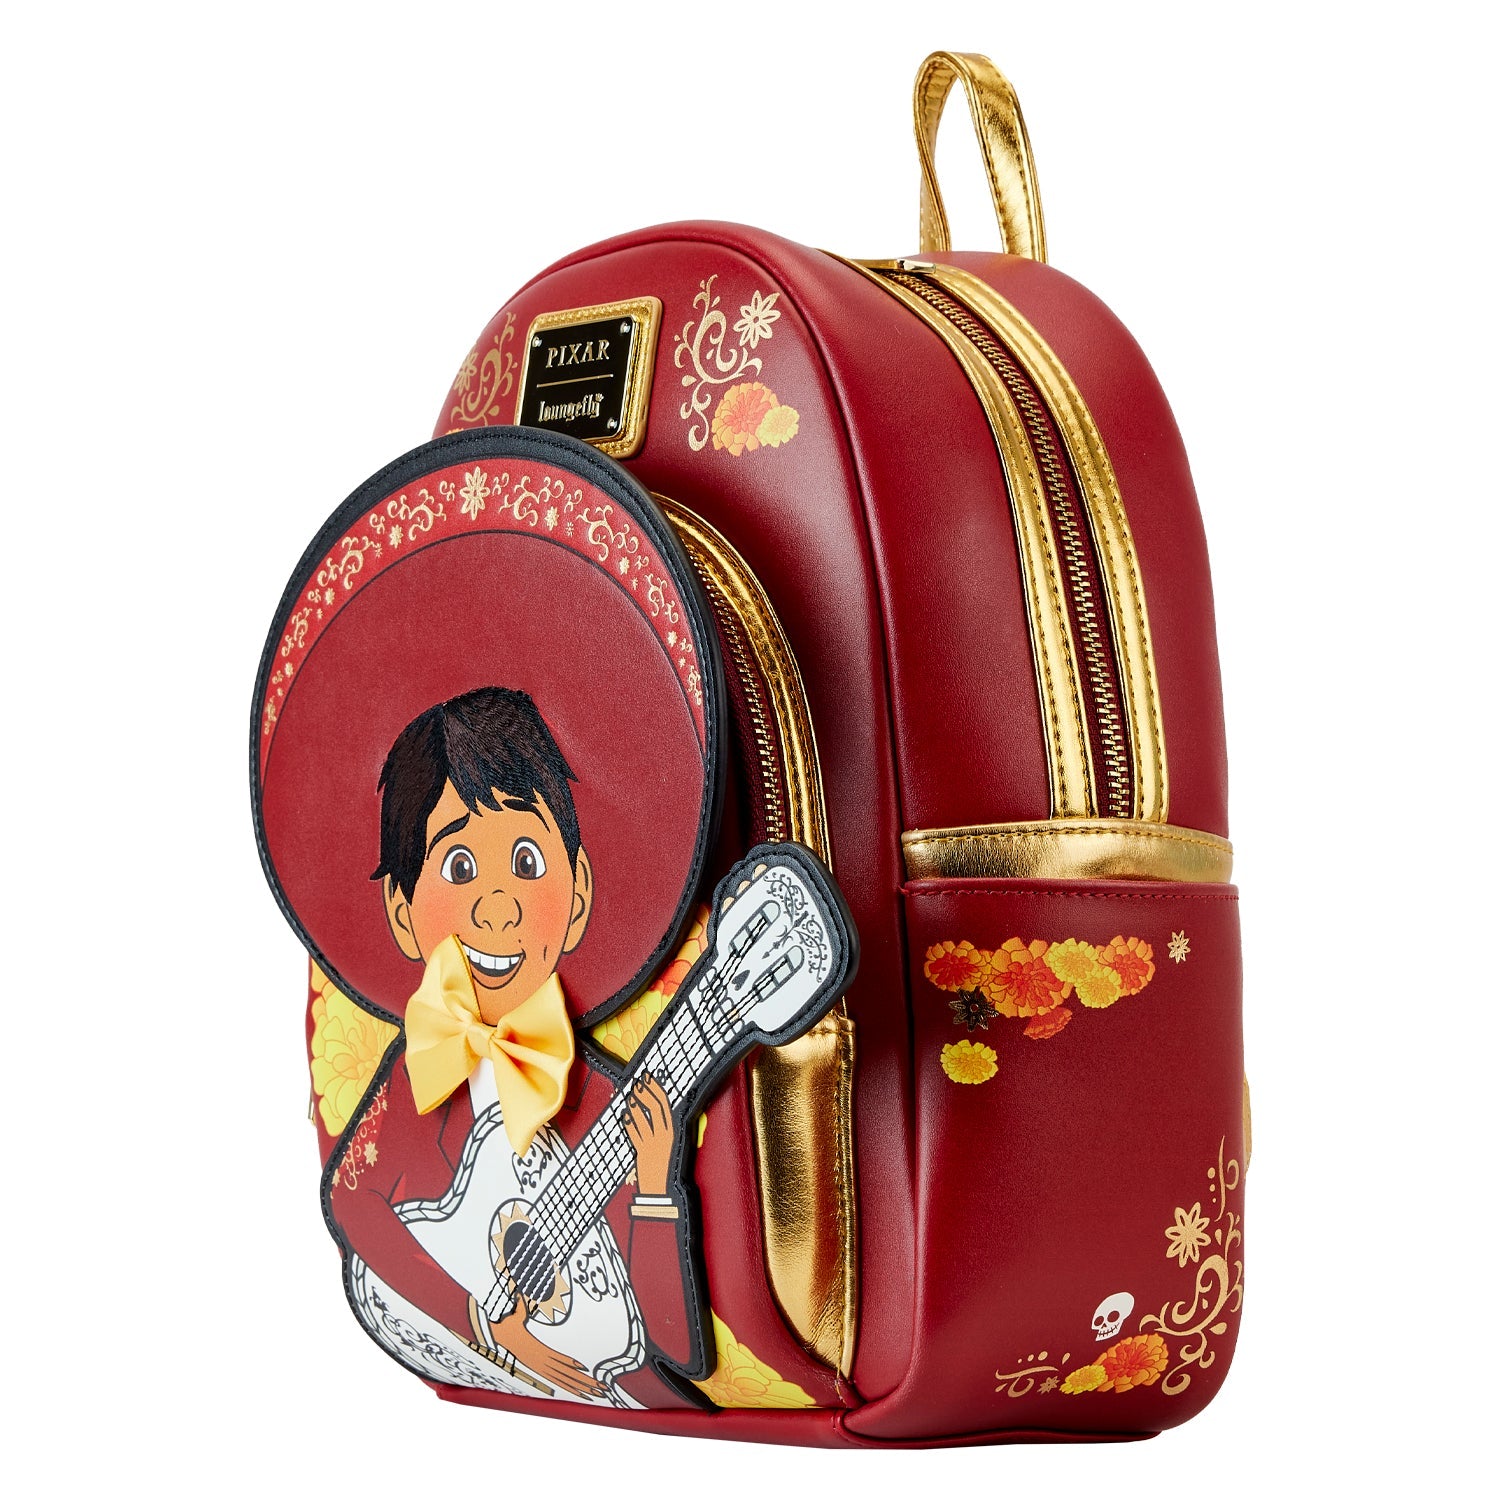 Loungefly x Pixar Coco Miguel Cosplay Mini Backpack - GeekCore